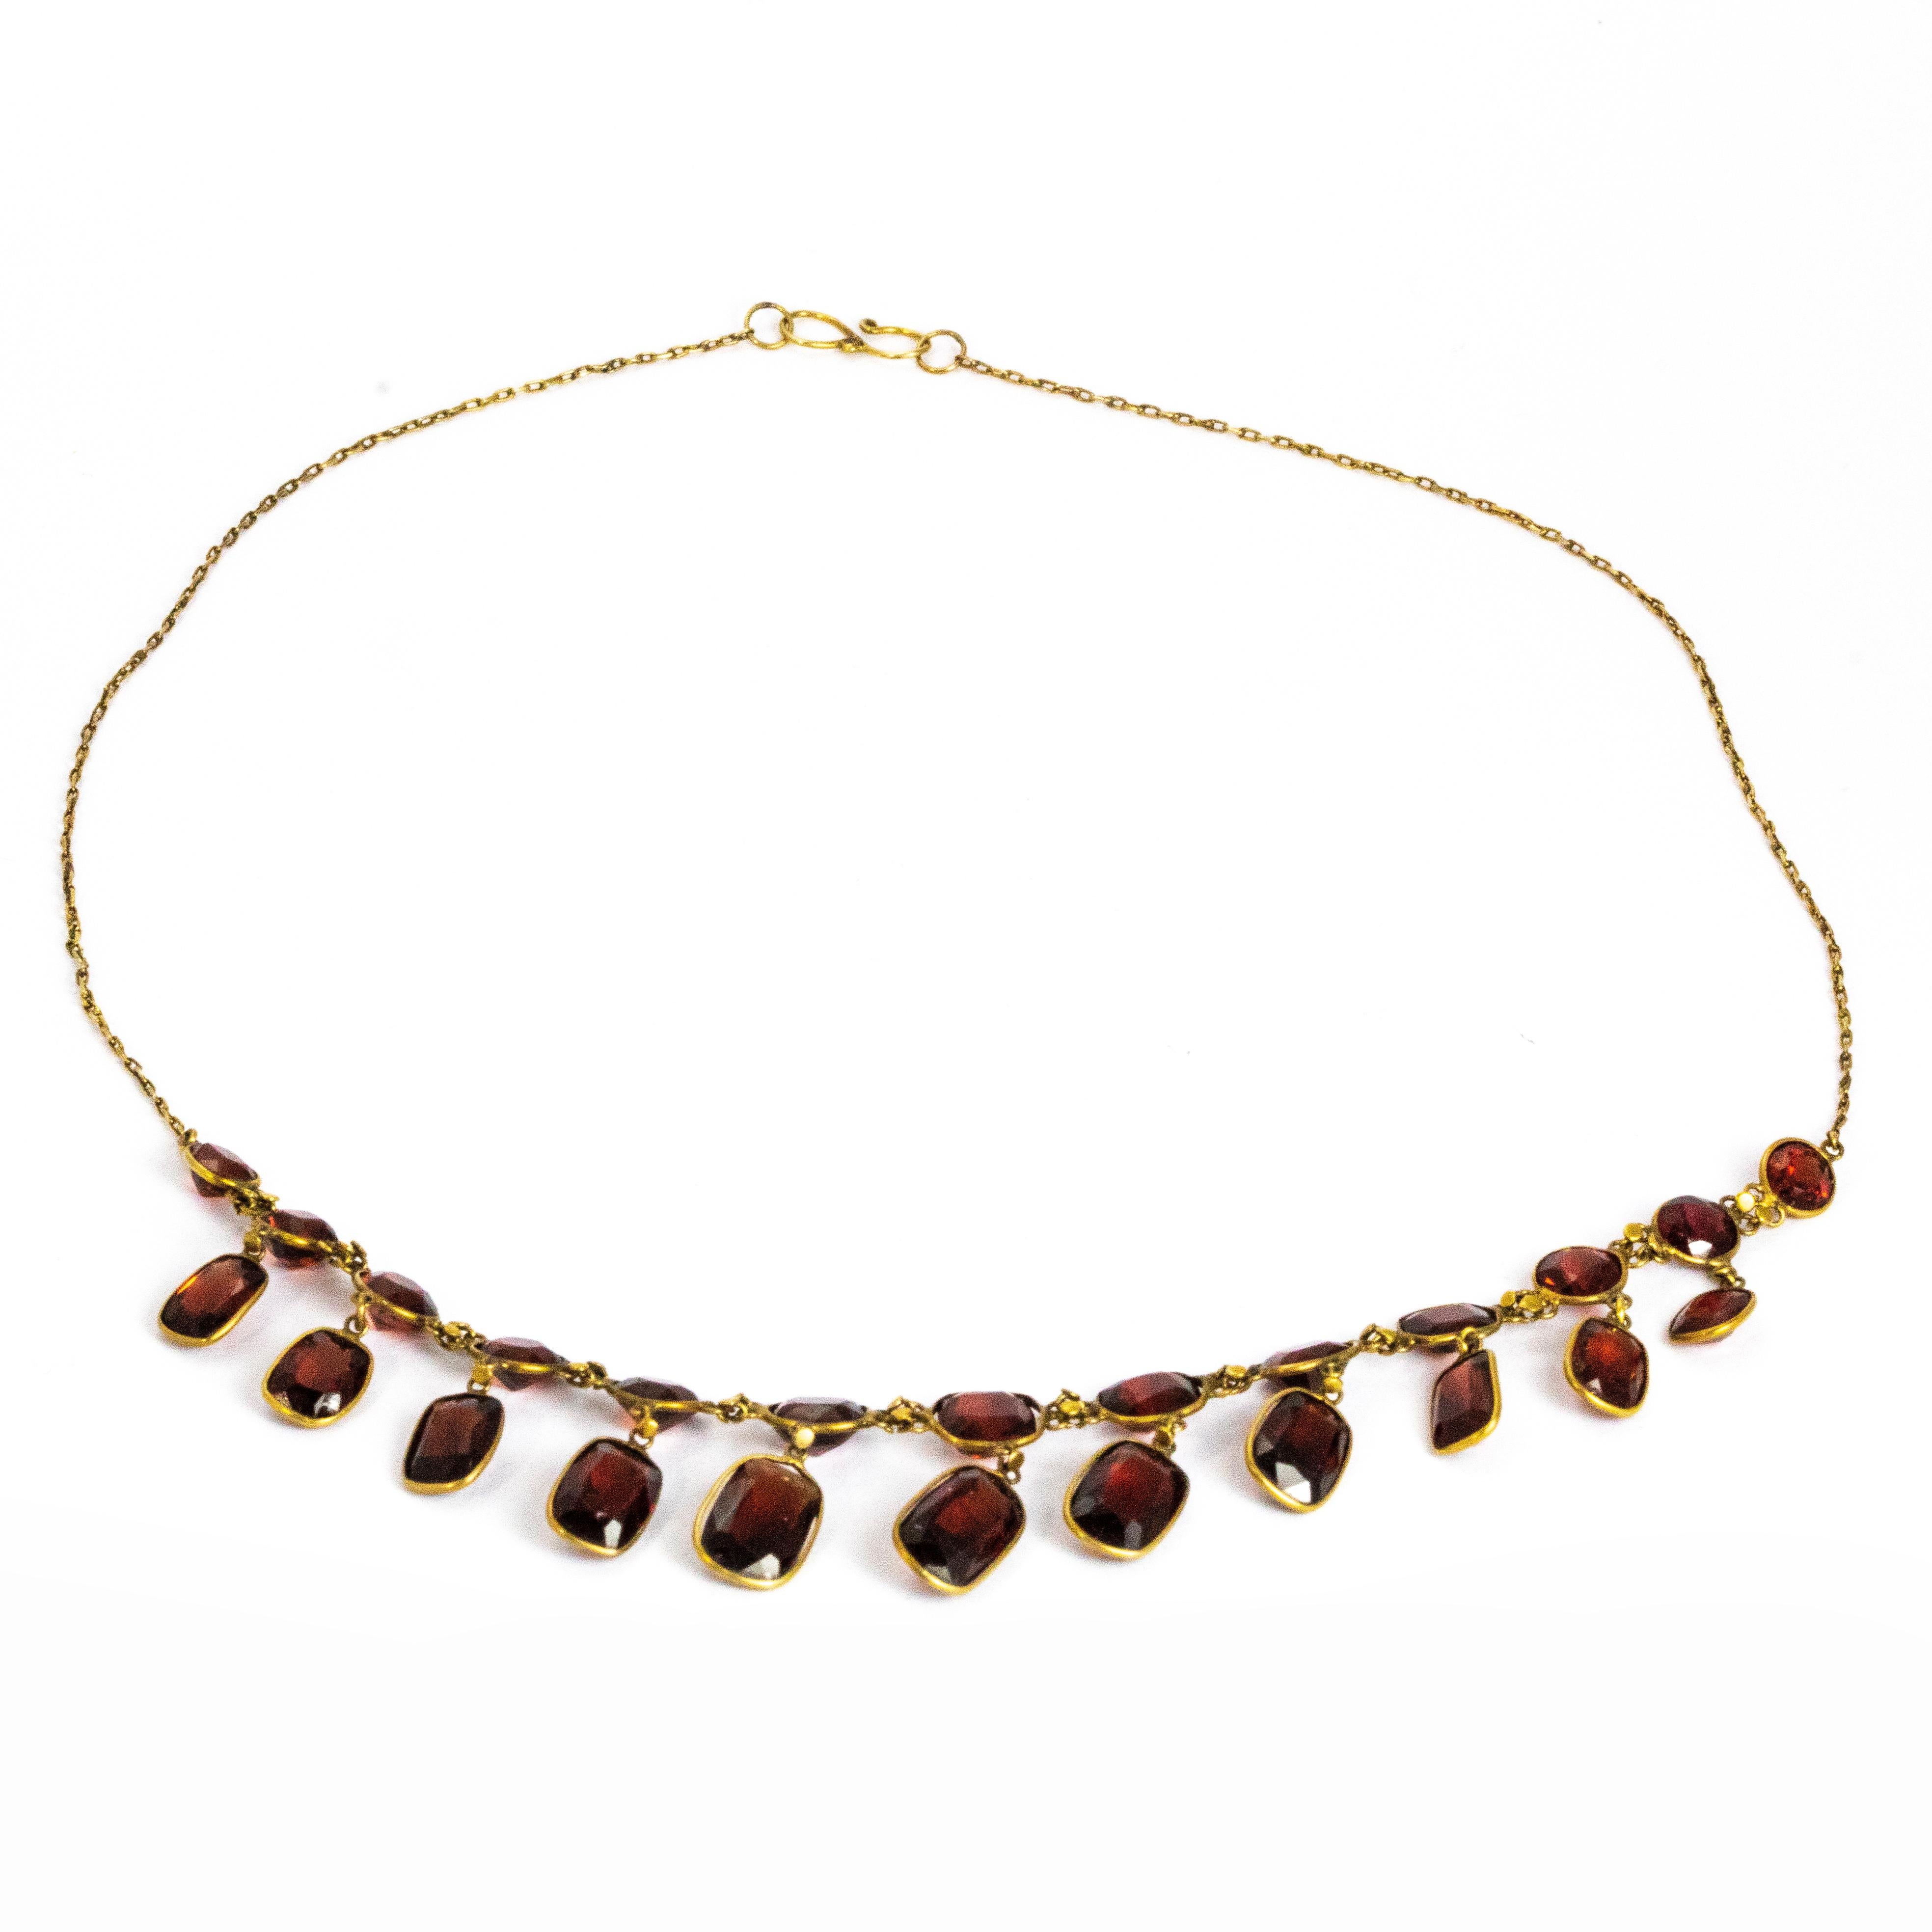 Women's Edwardian Garnet and Yellow Gold Necklace